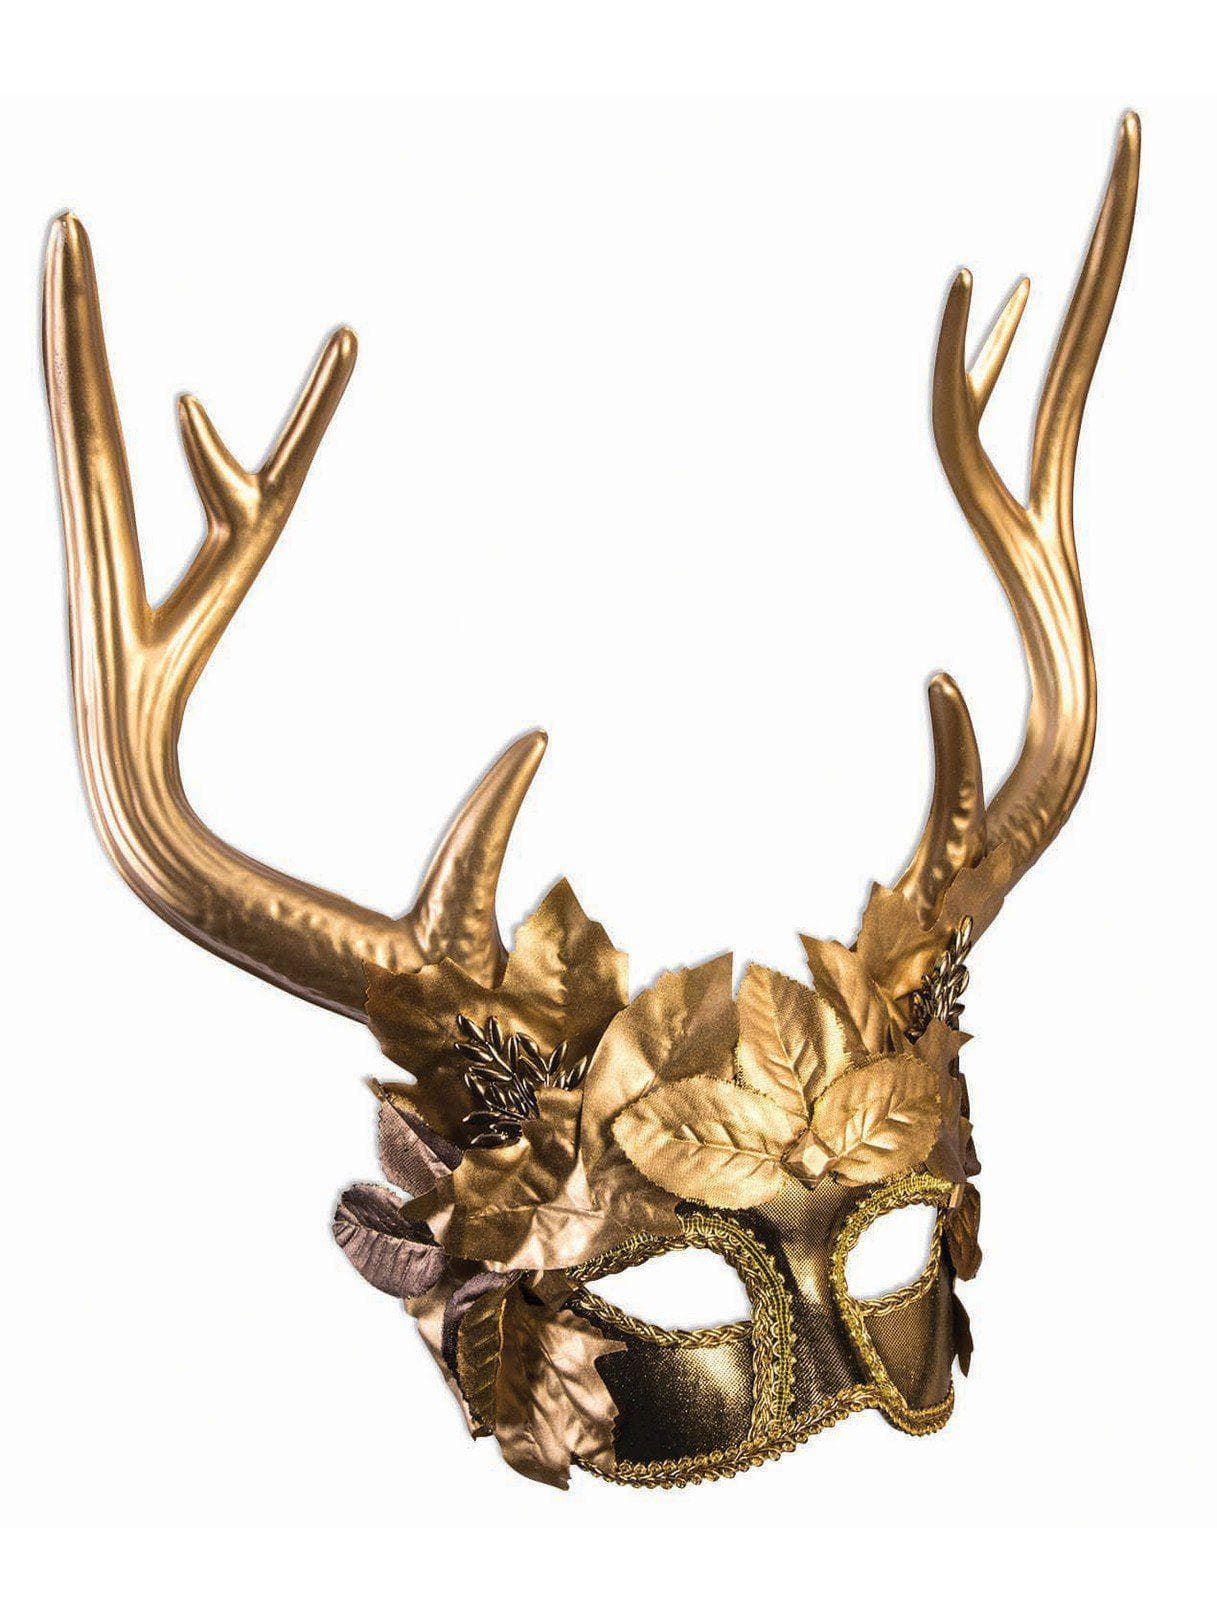 Adult Golden Mythical Creature Faun Masquerade Mask - costumes.com